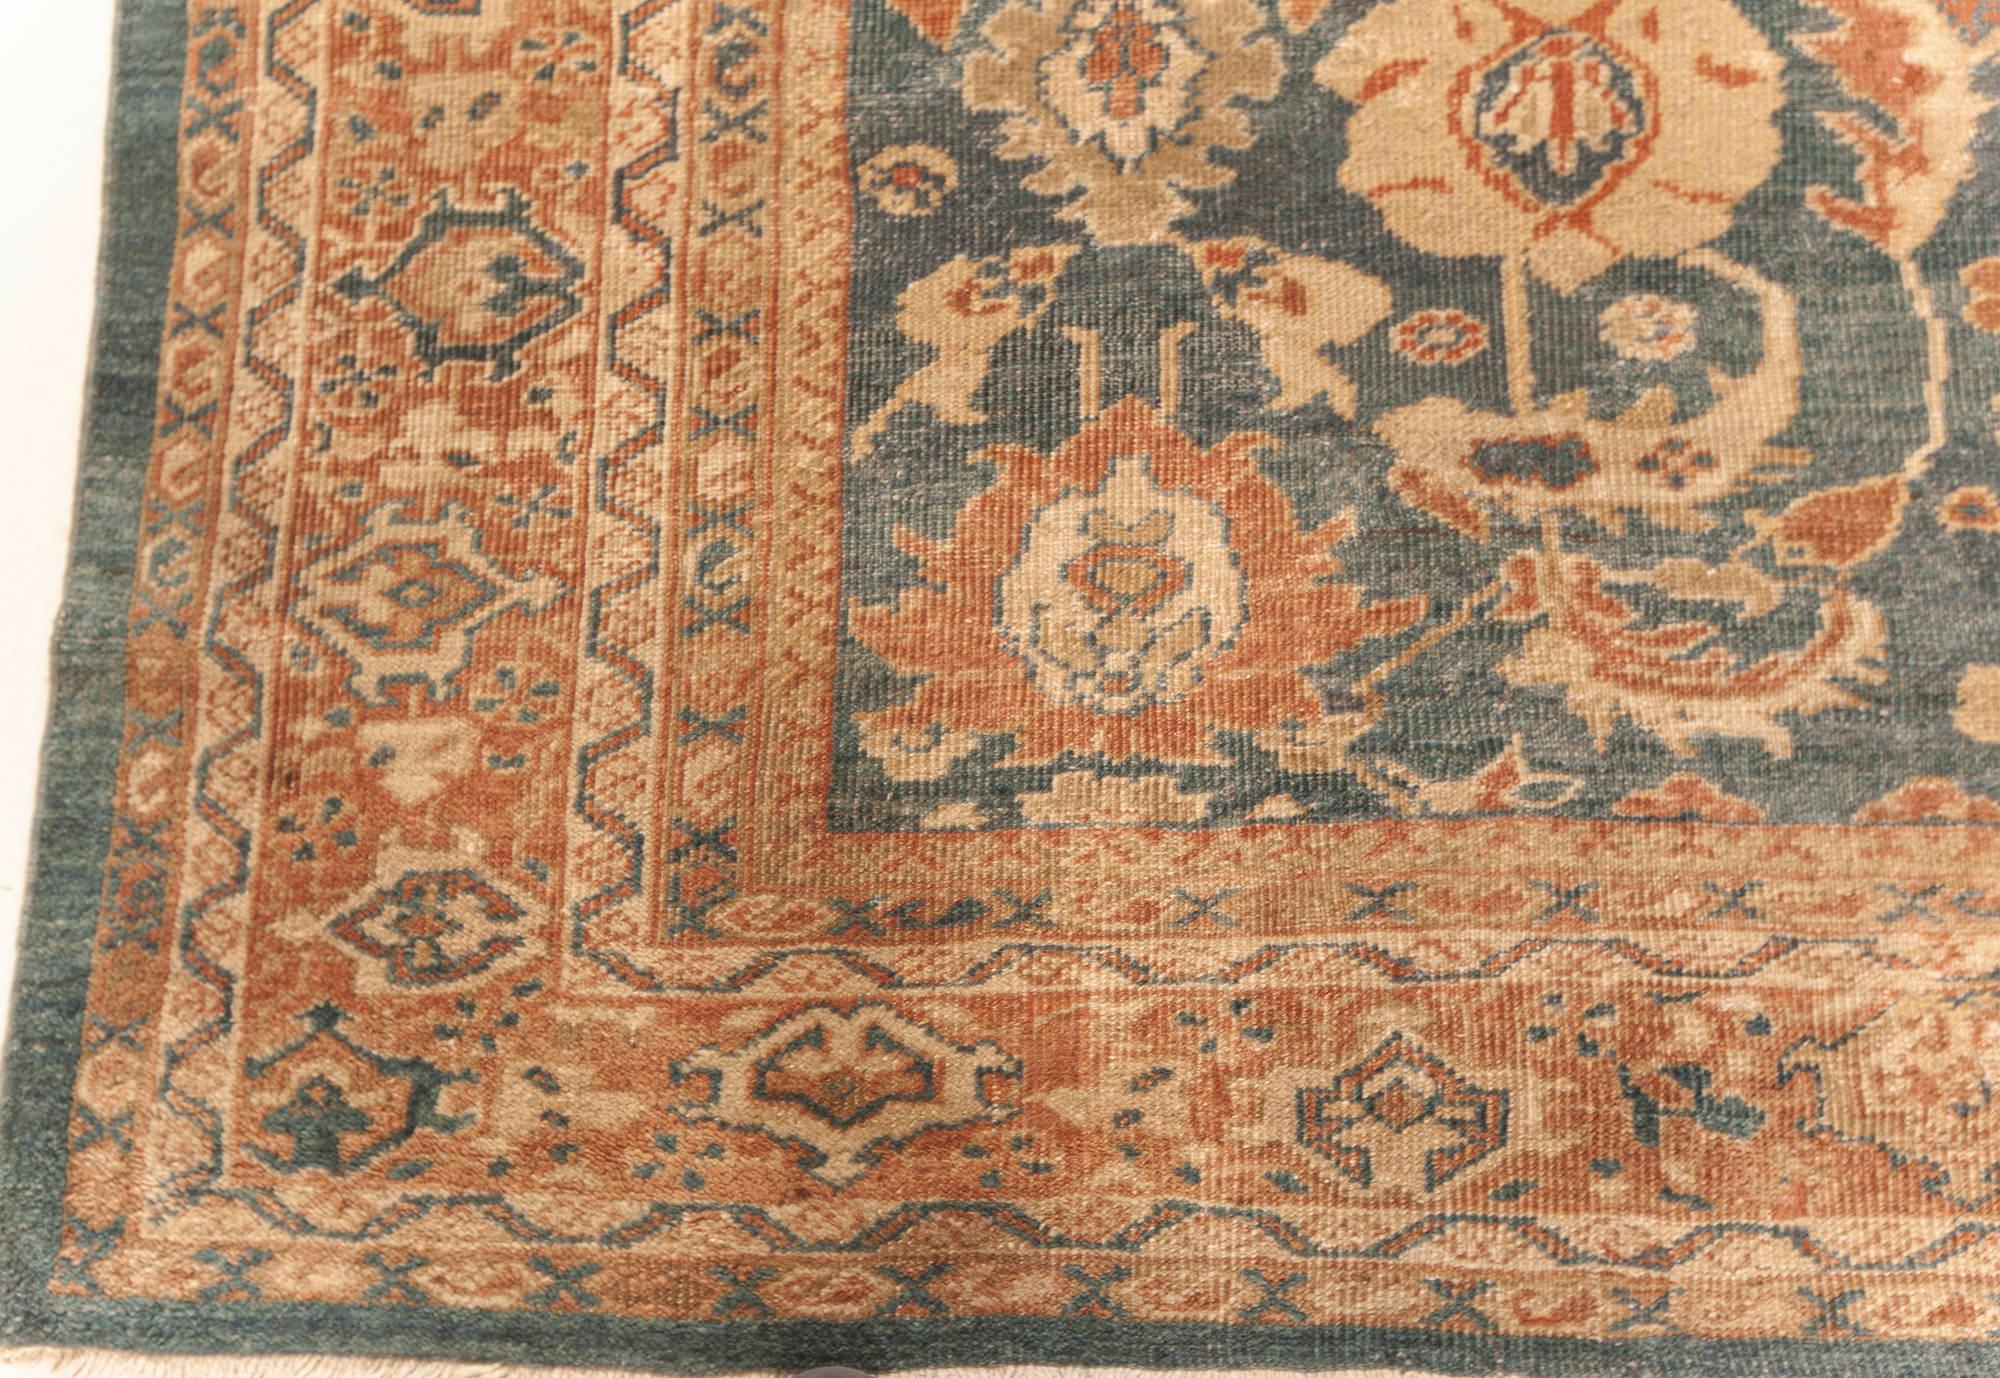 20th Century High-quality Persian Sultanabad Beige, Blue, Red Handmade Wool Rug